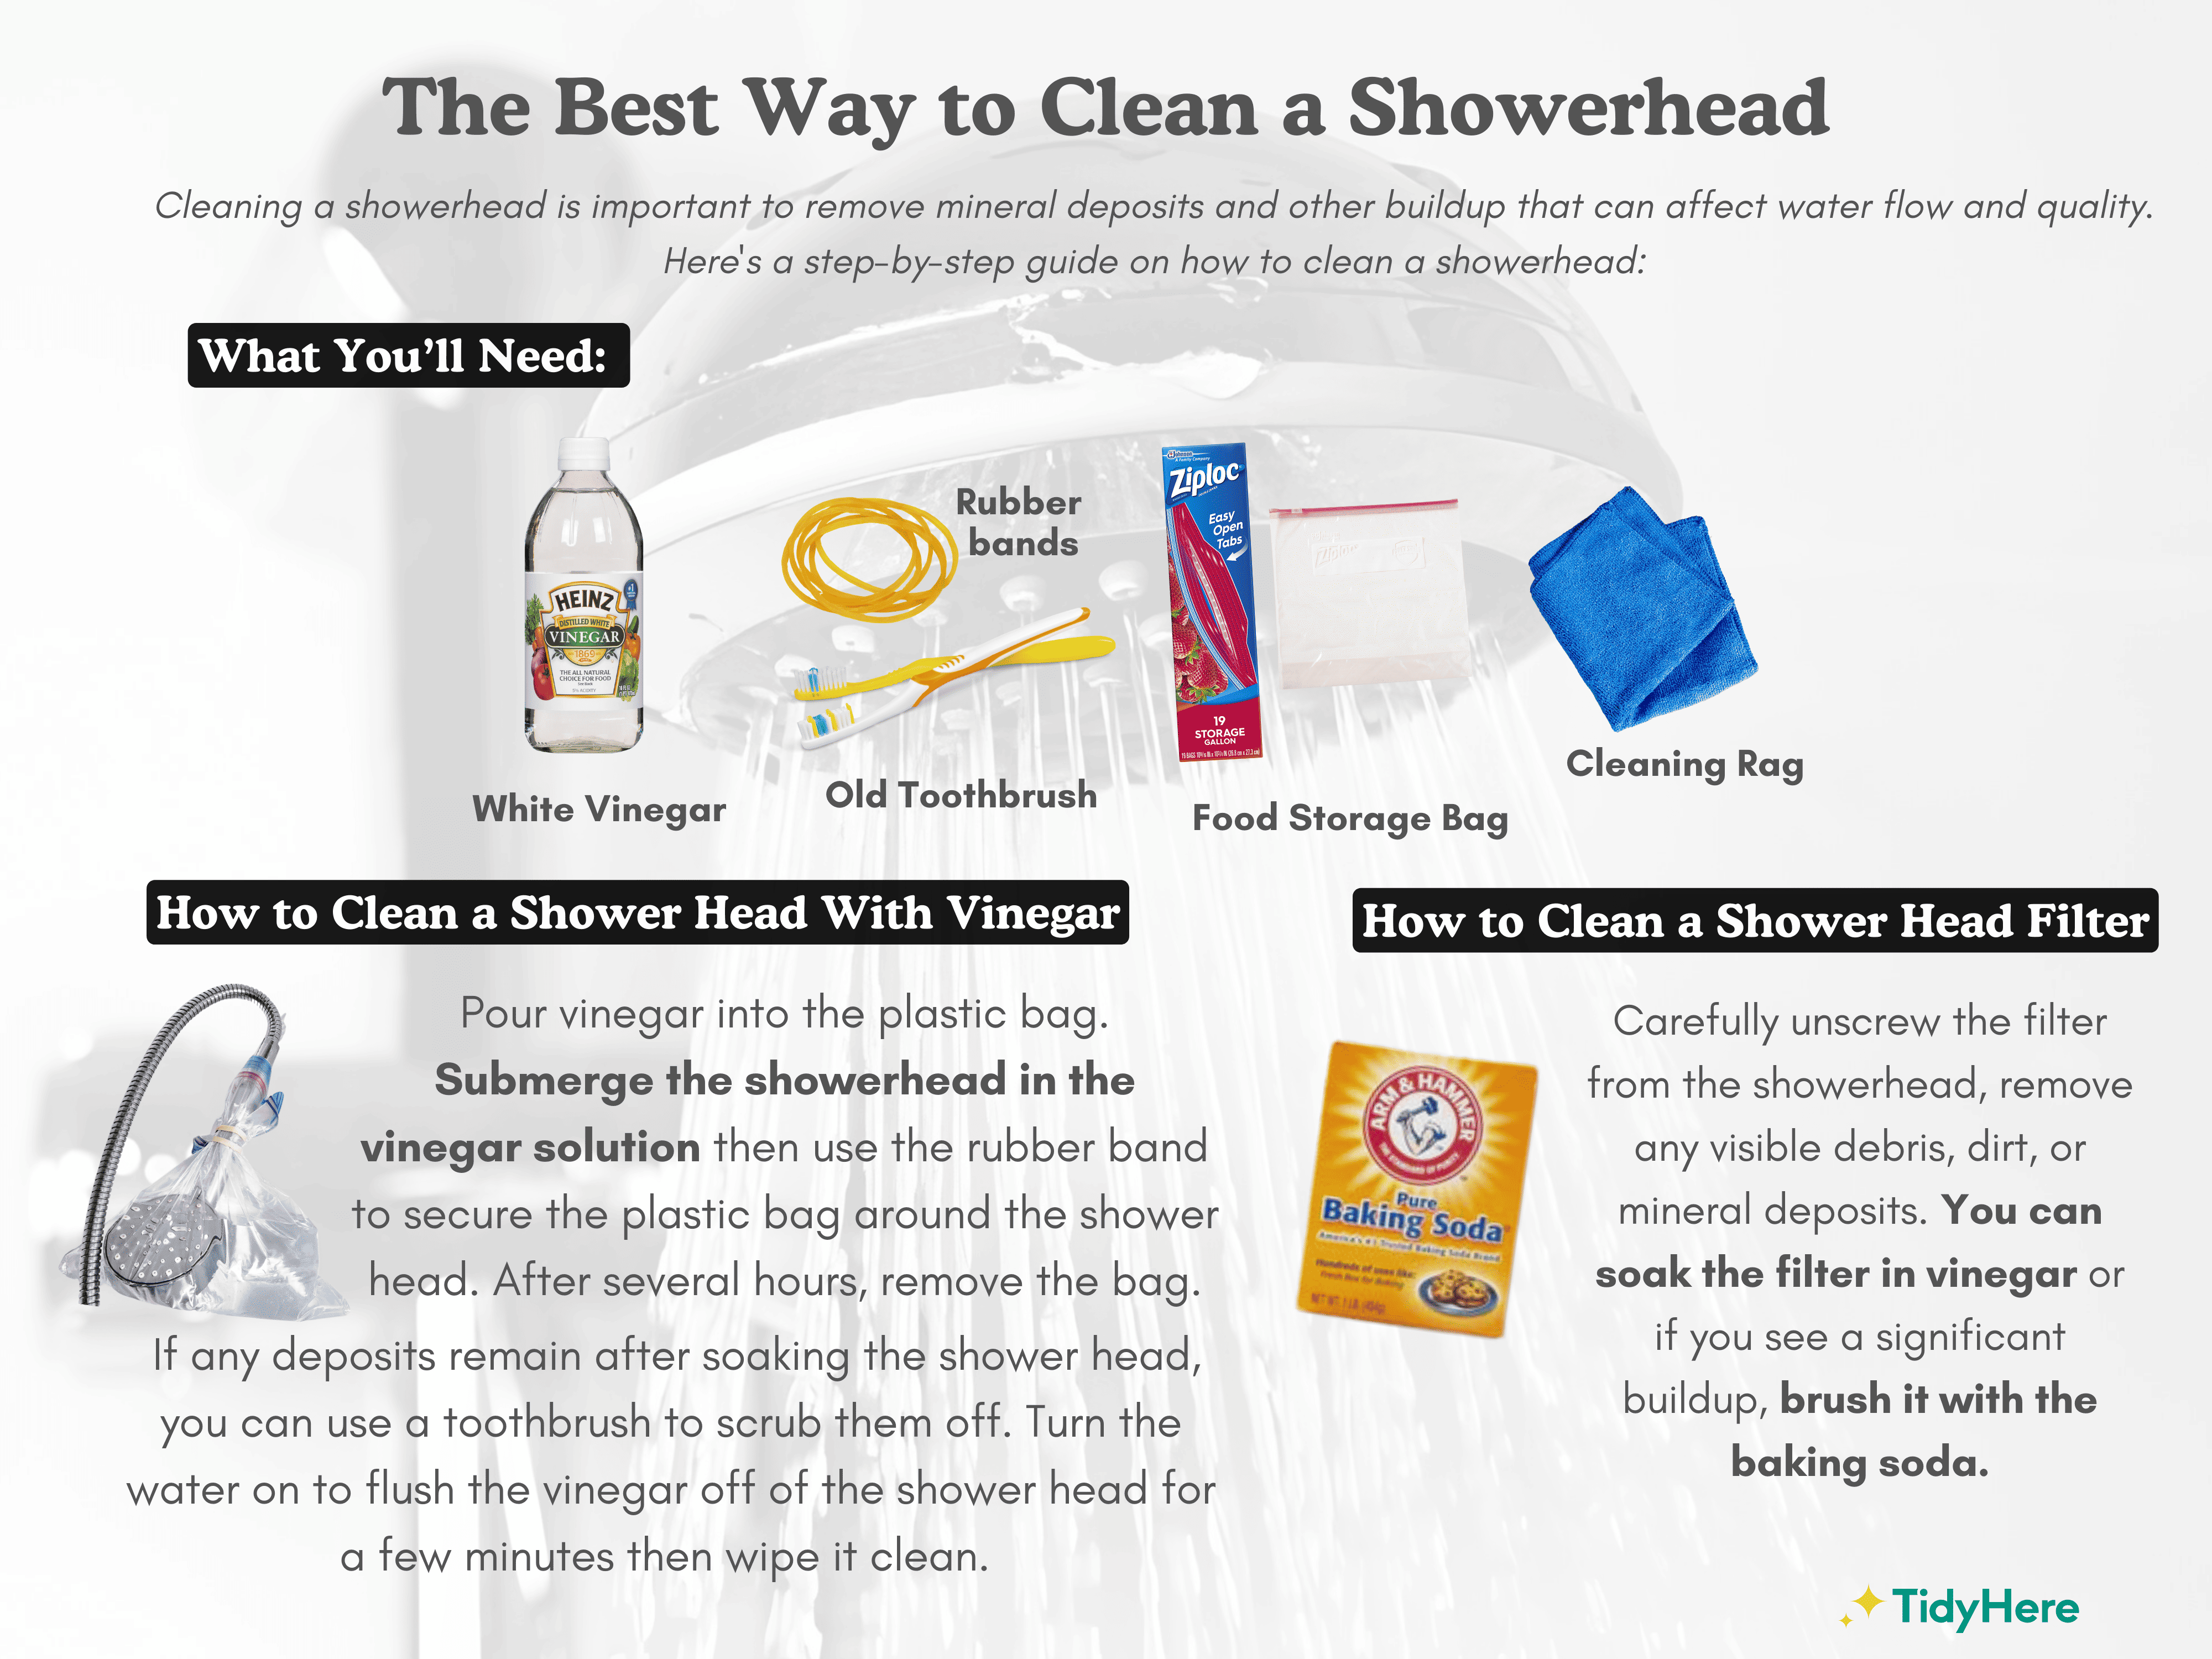 The Best Way to Clean a Showerhead Tidyhere Infographic